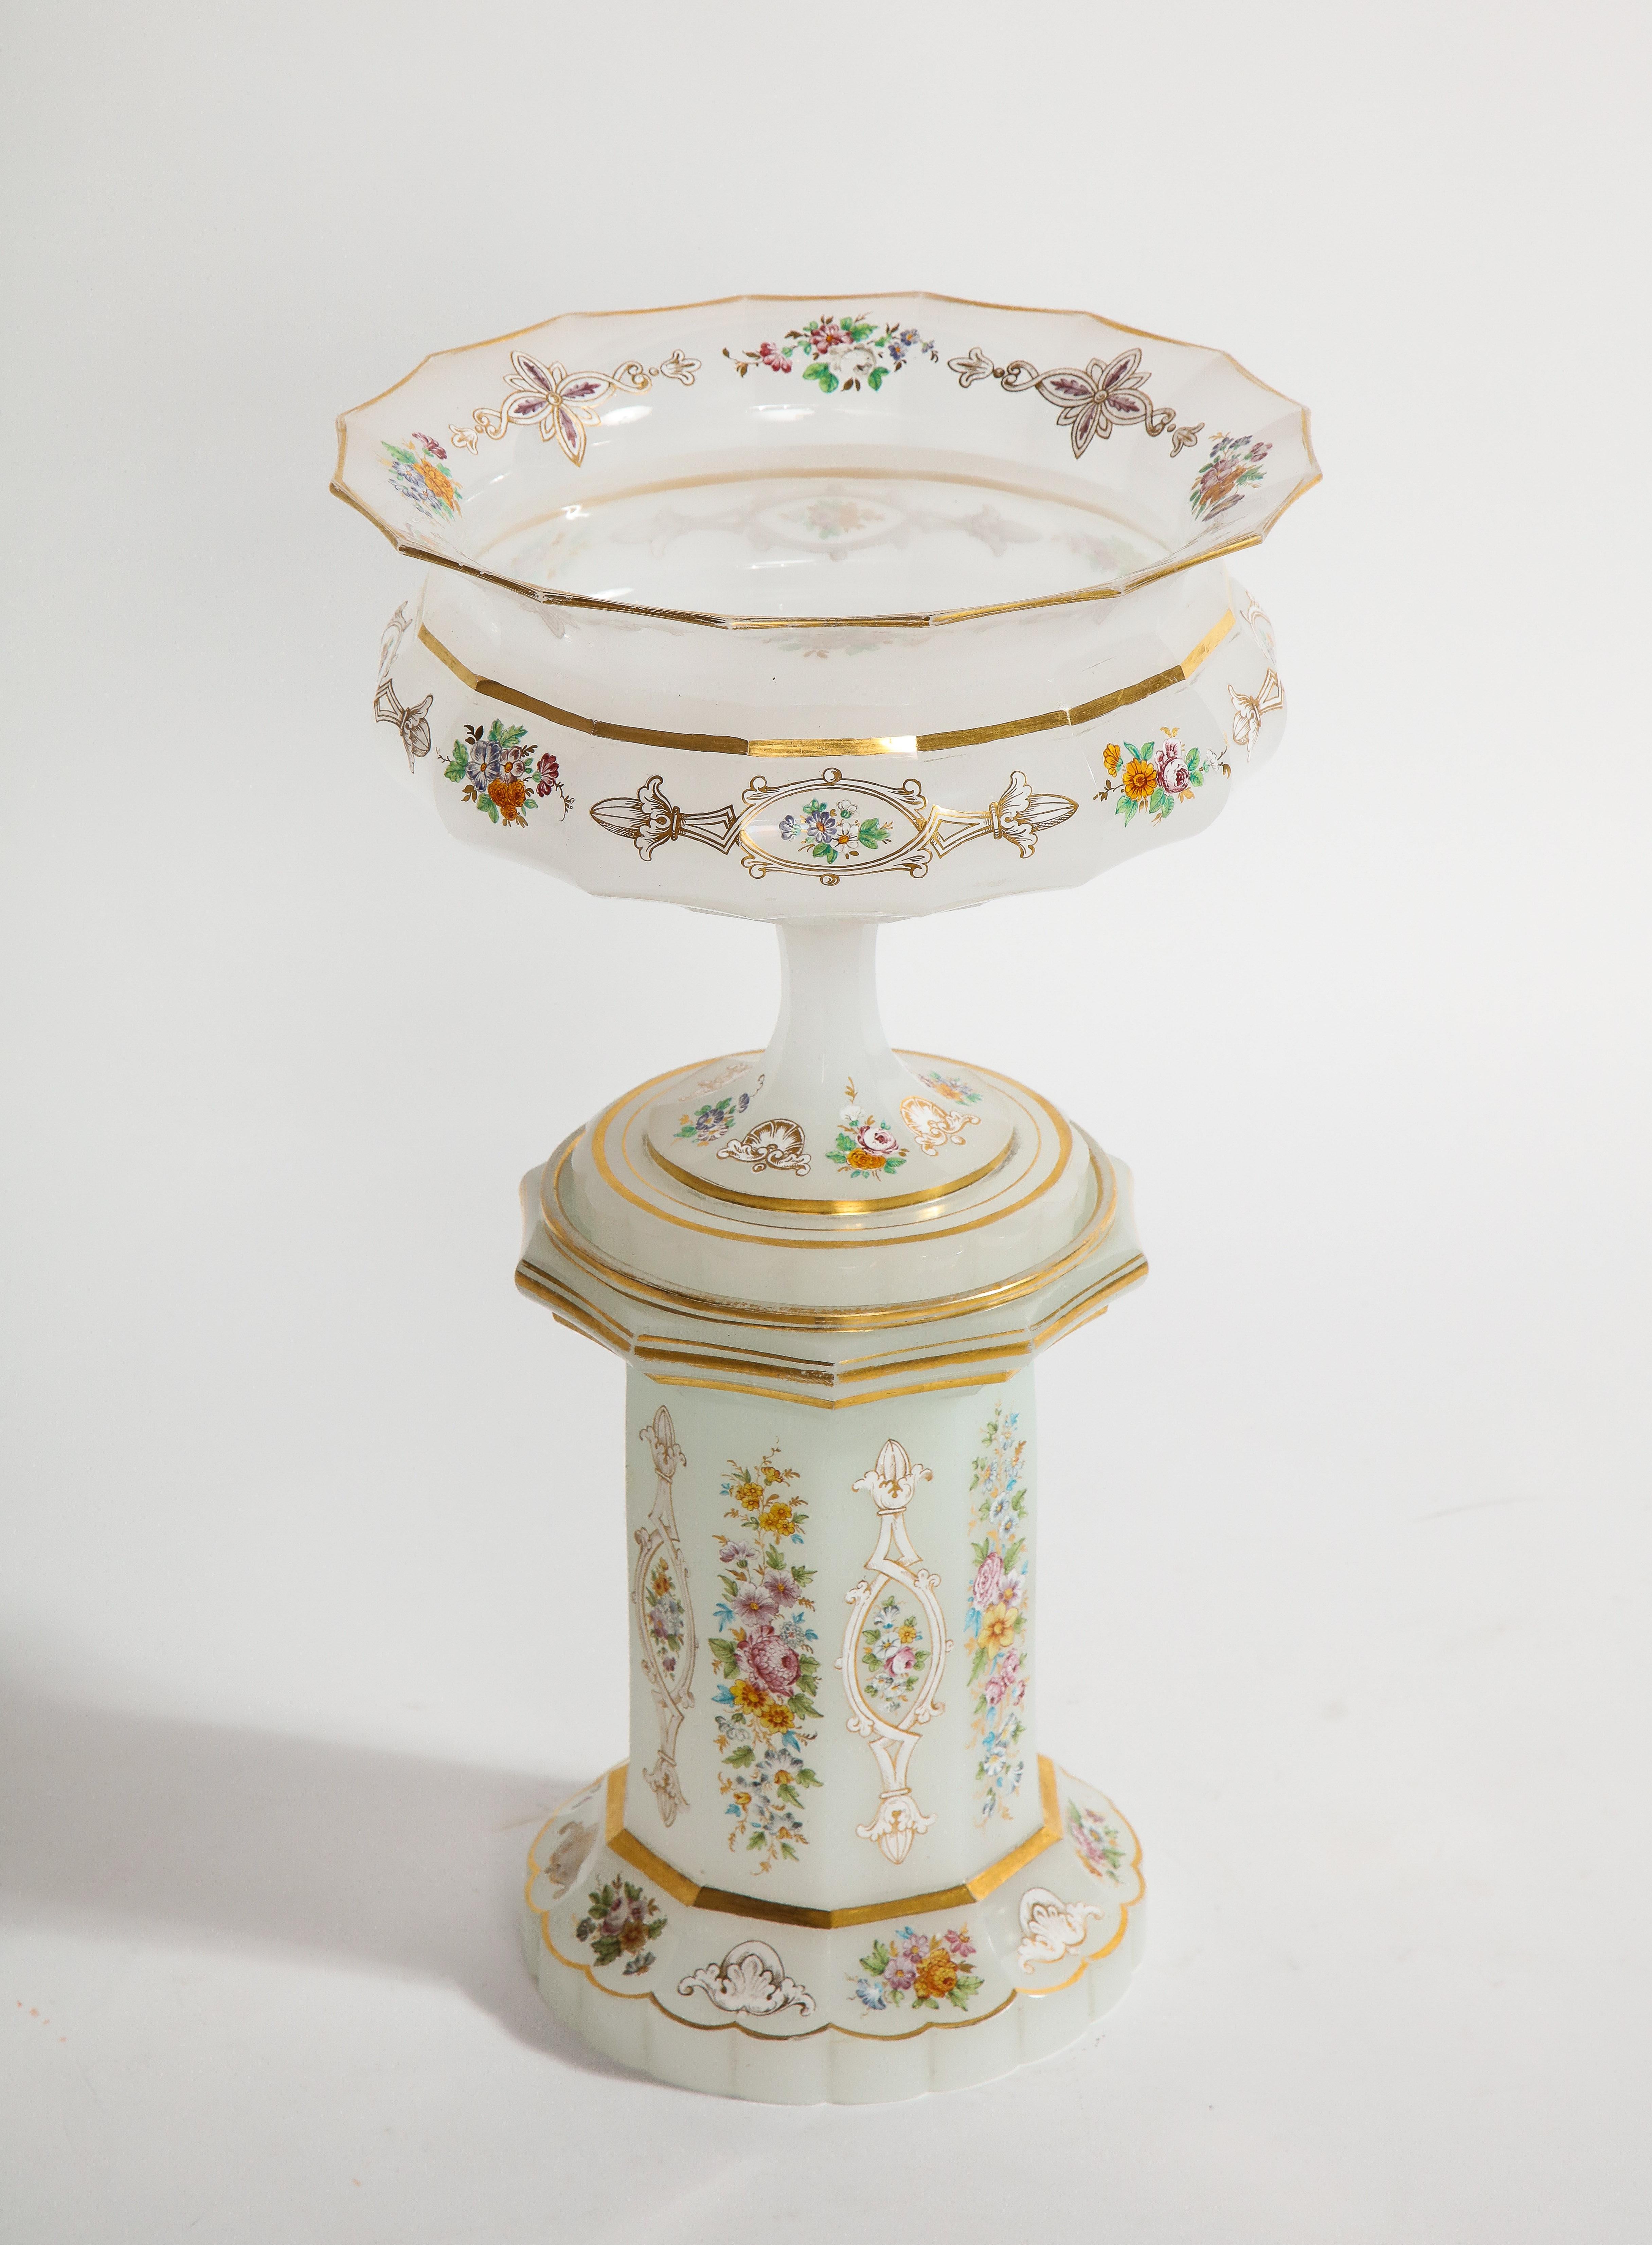 A rare hand-carved and faceted 19th century antique bohemian white opaline centerpiece resting on its original white opaline plinth. The opaline crystal is of the finest quality with beautiful tapering outer edges and a gorgeous wide-mouth body,